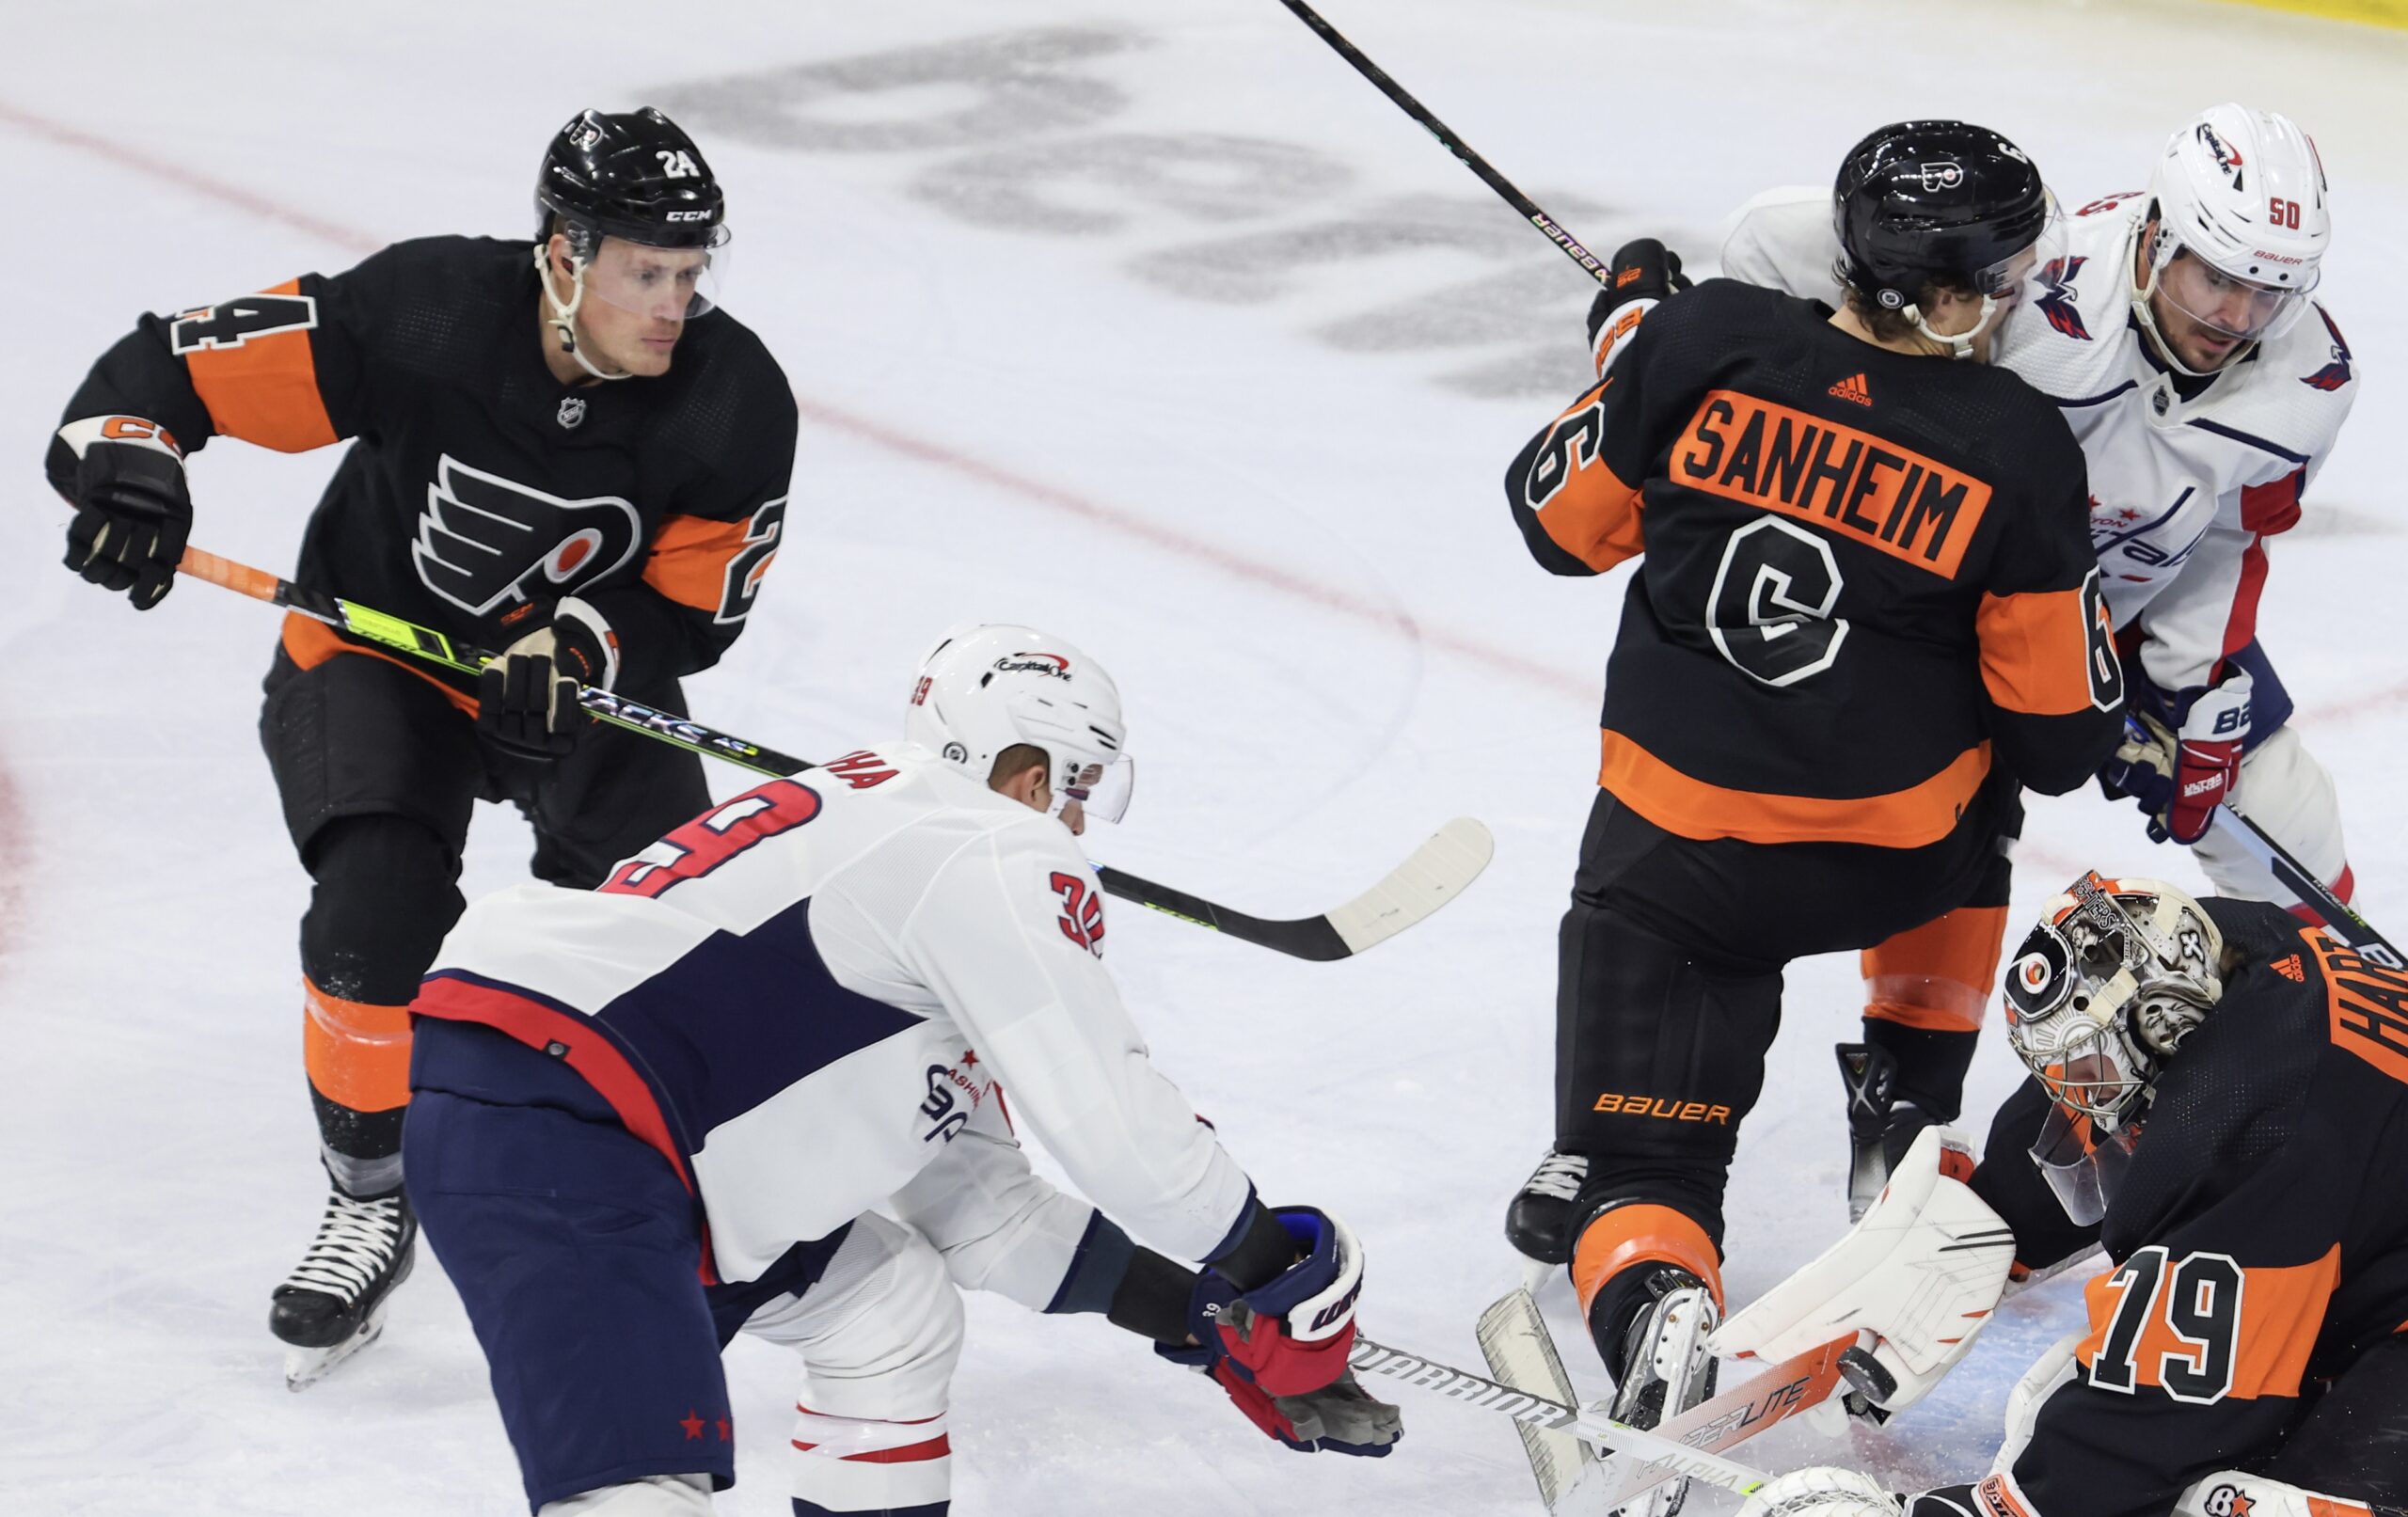 Flyers rout Canadiens in East finals opener